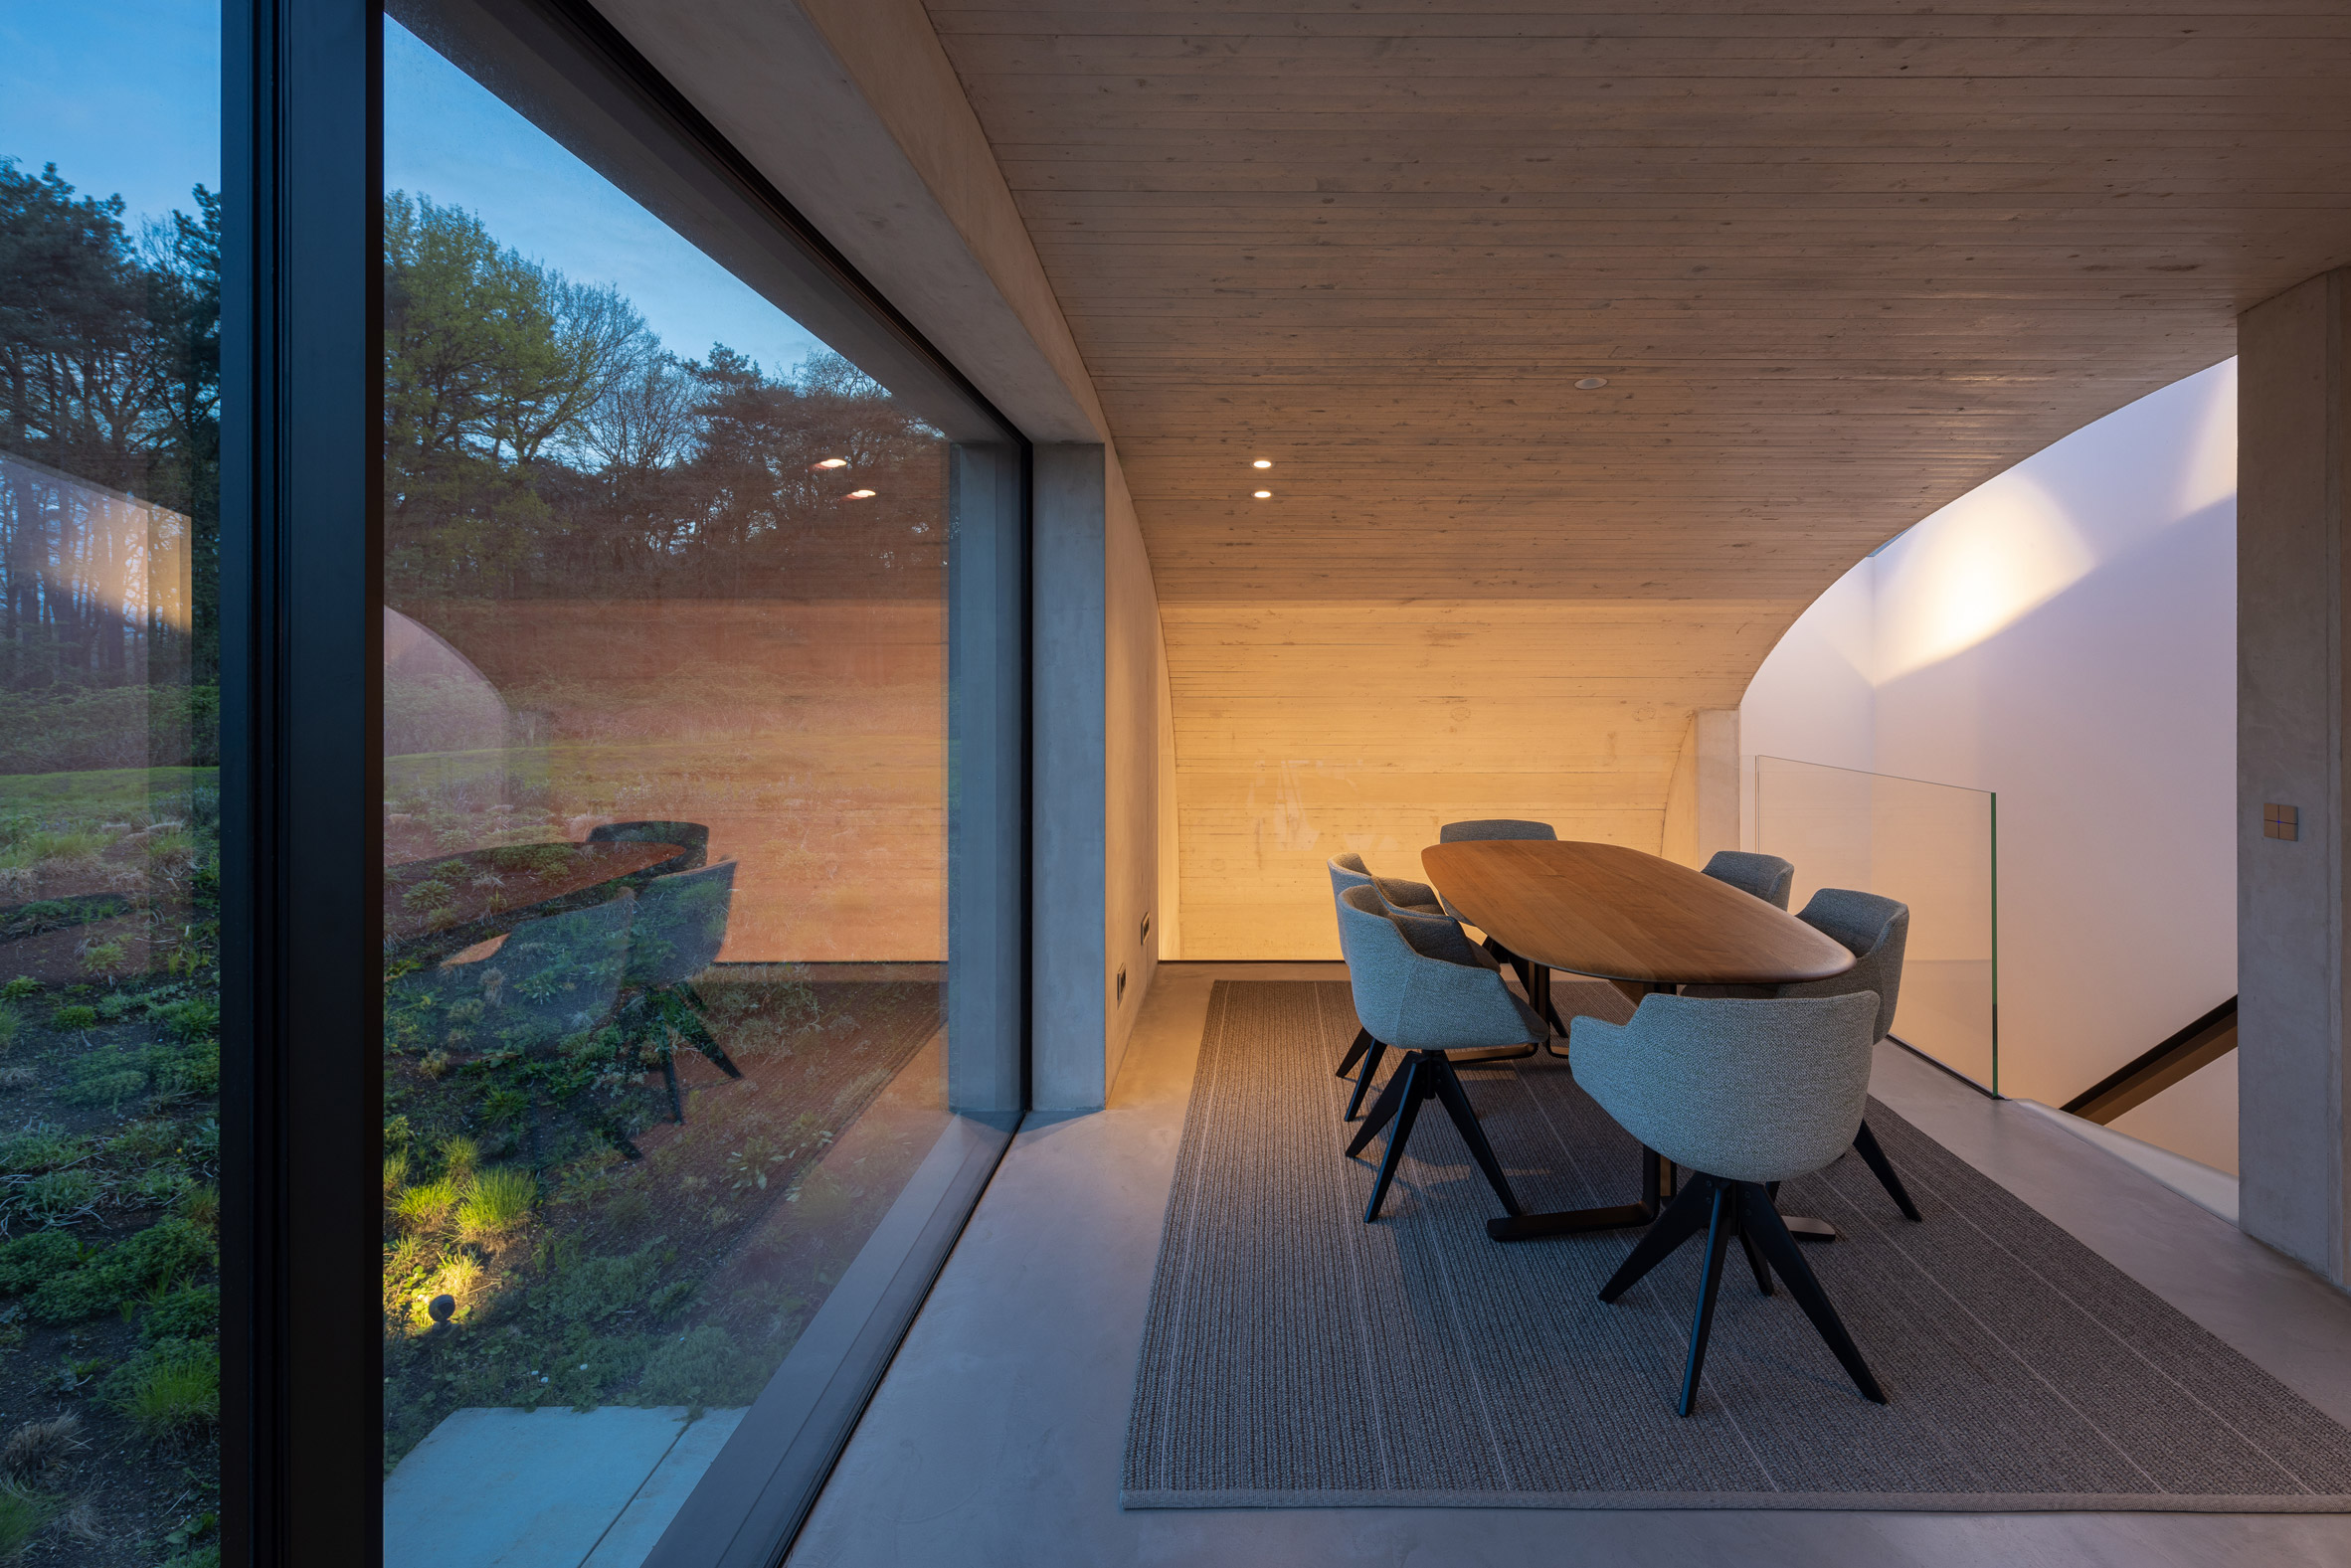 Concrete dining area with floor-to-ceiling glass doors leading to a patio